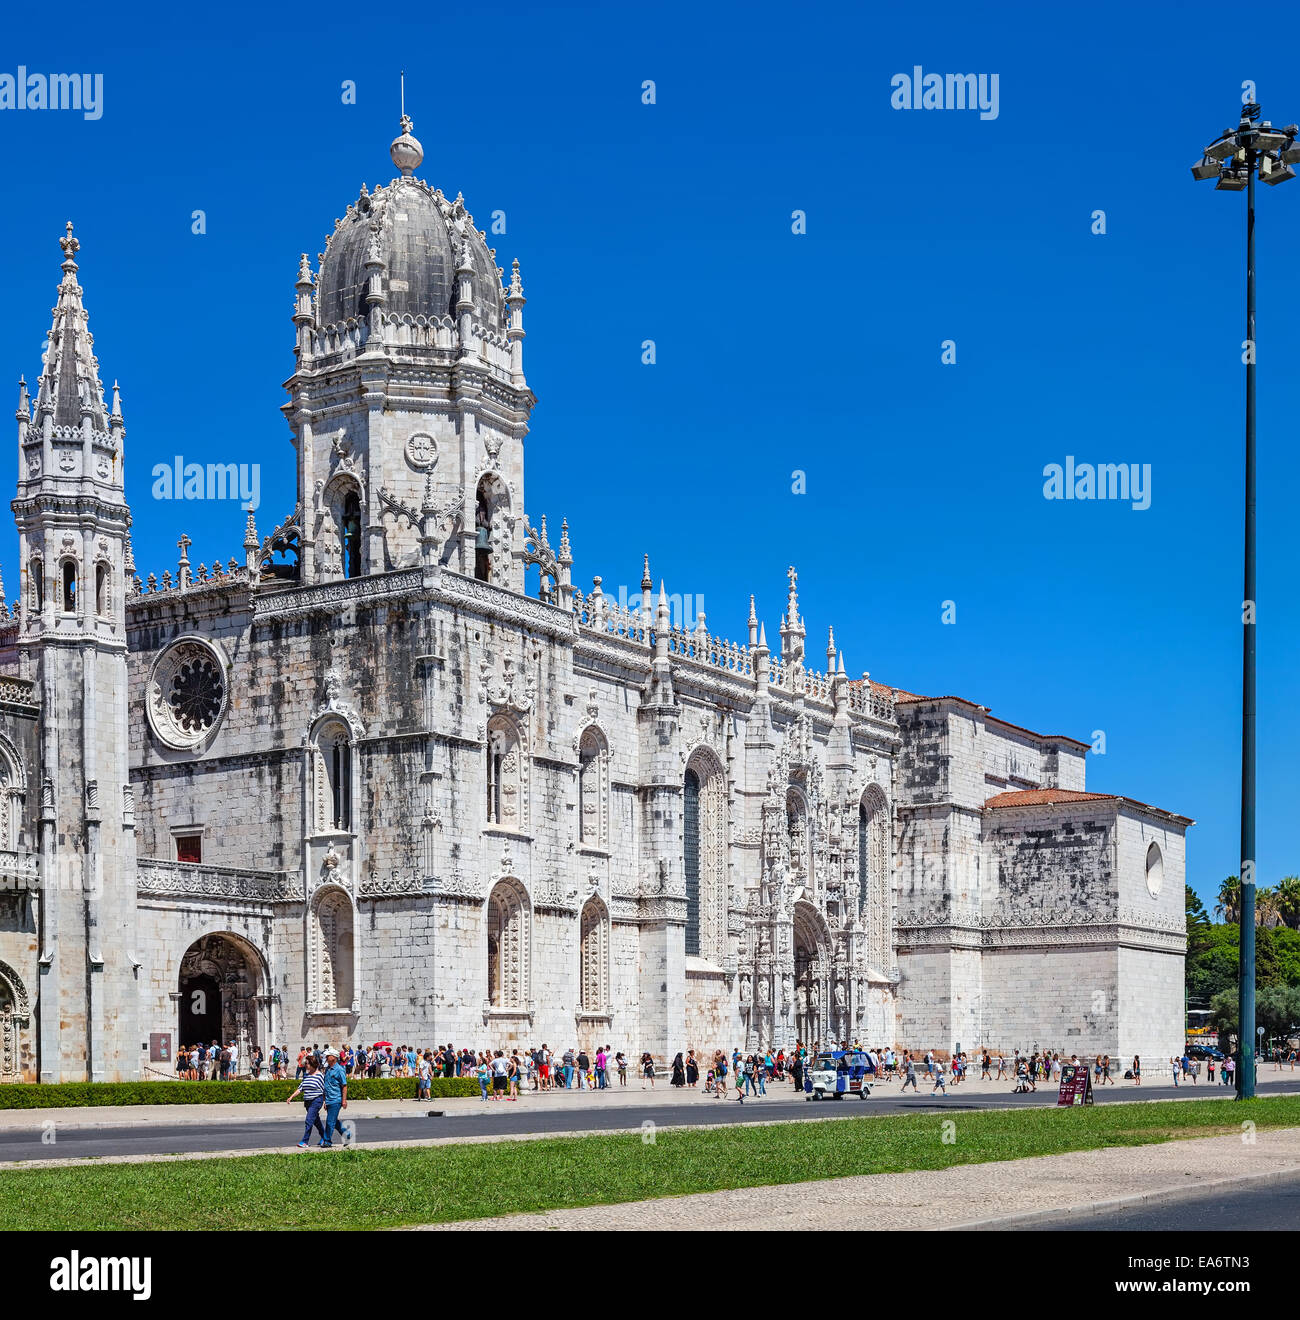 Jerónimos monastery in Lisbon, Portugal. Classified as UNESCO World Heritage it stands as the best example of the Manueline art. Stock Photo